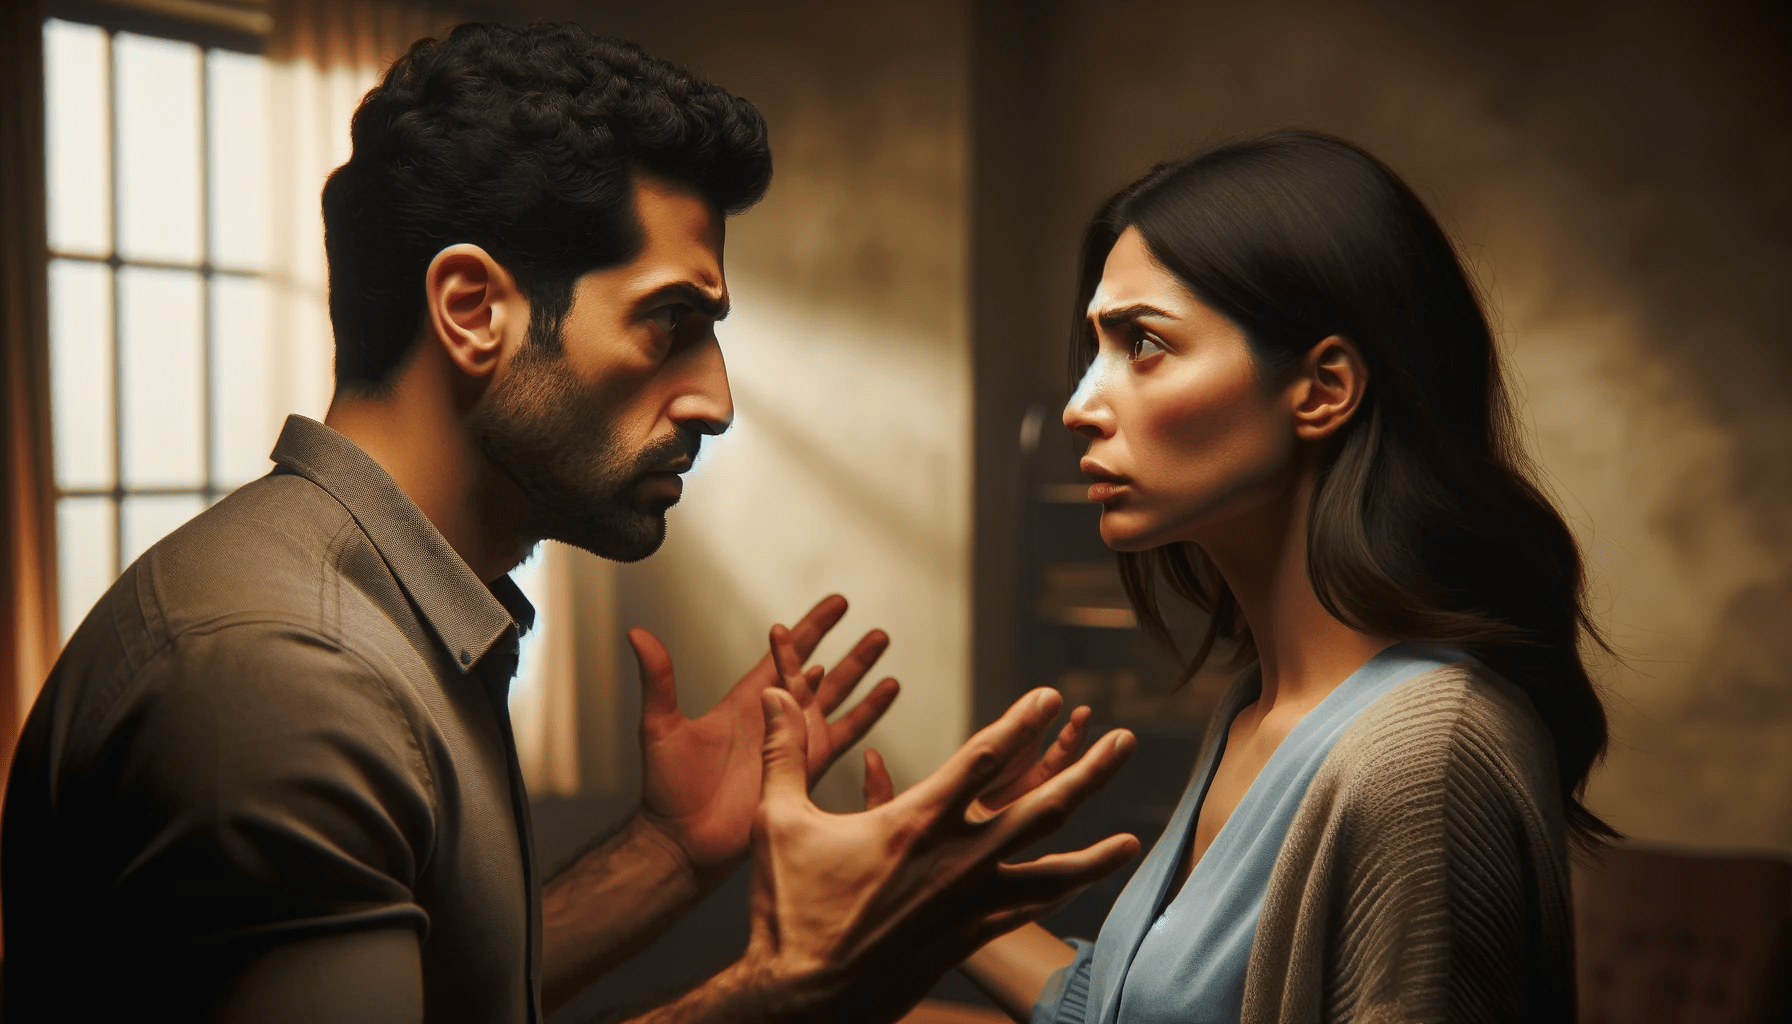 A Middle Eastern man and a Hispanic woman in the midst of a heated argument captured from head to waist. Their expressions are tense and their gestur